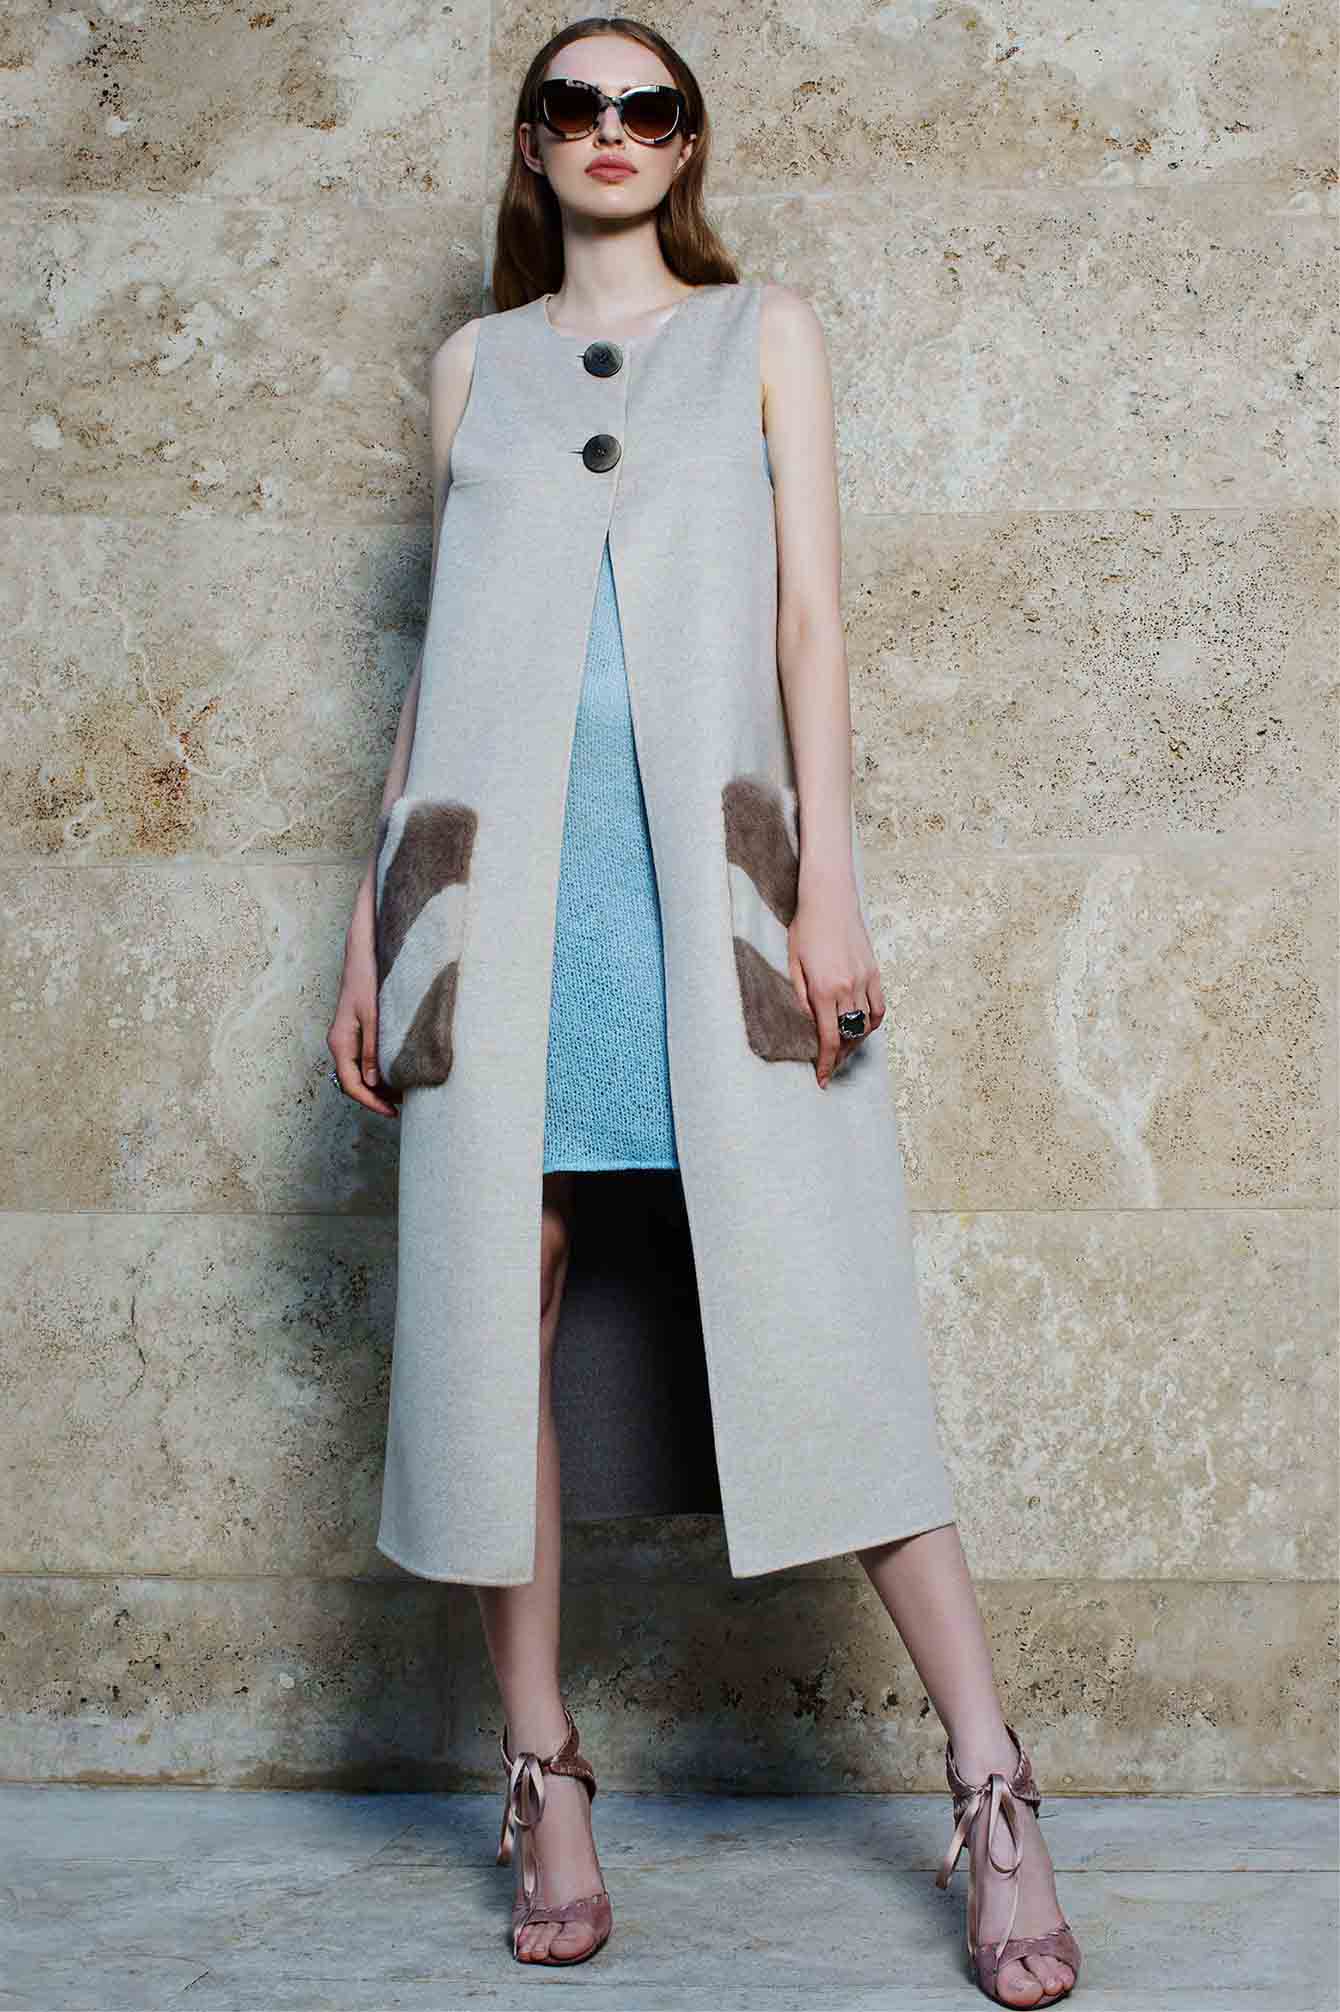 Cashmere coats with fur. Paolo Moretti collection in cashmere